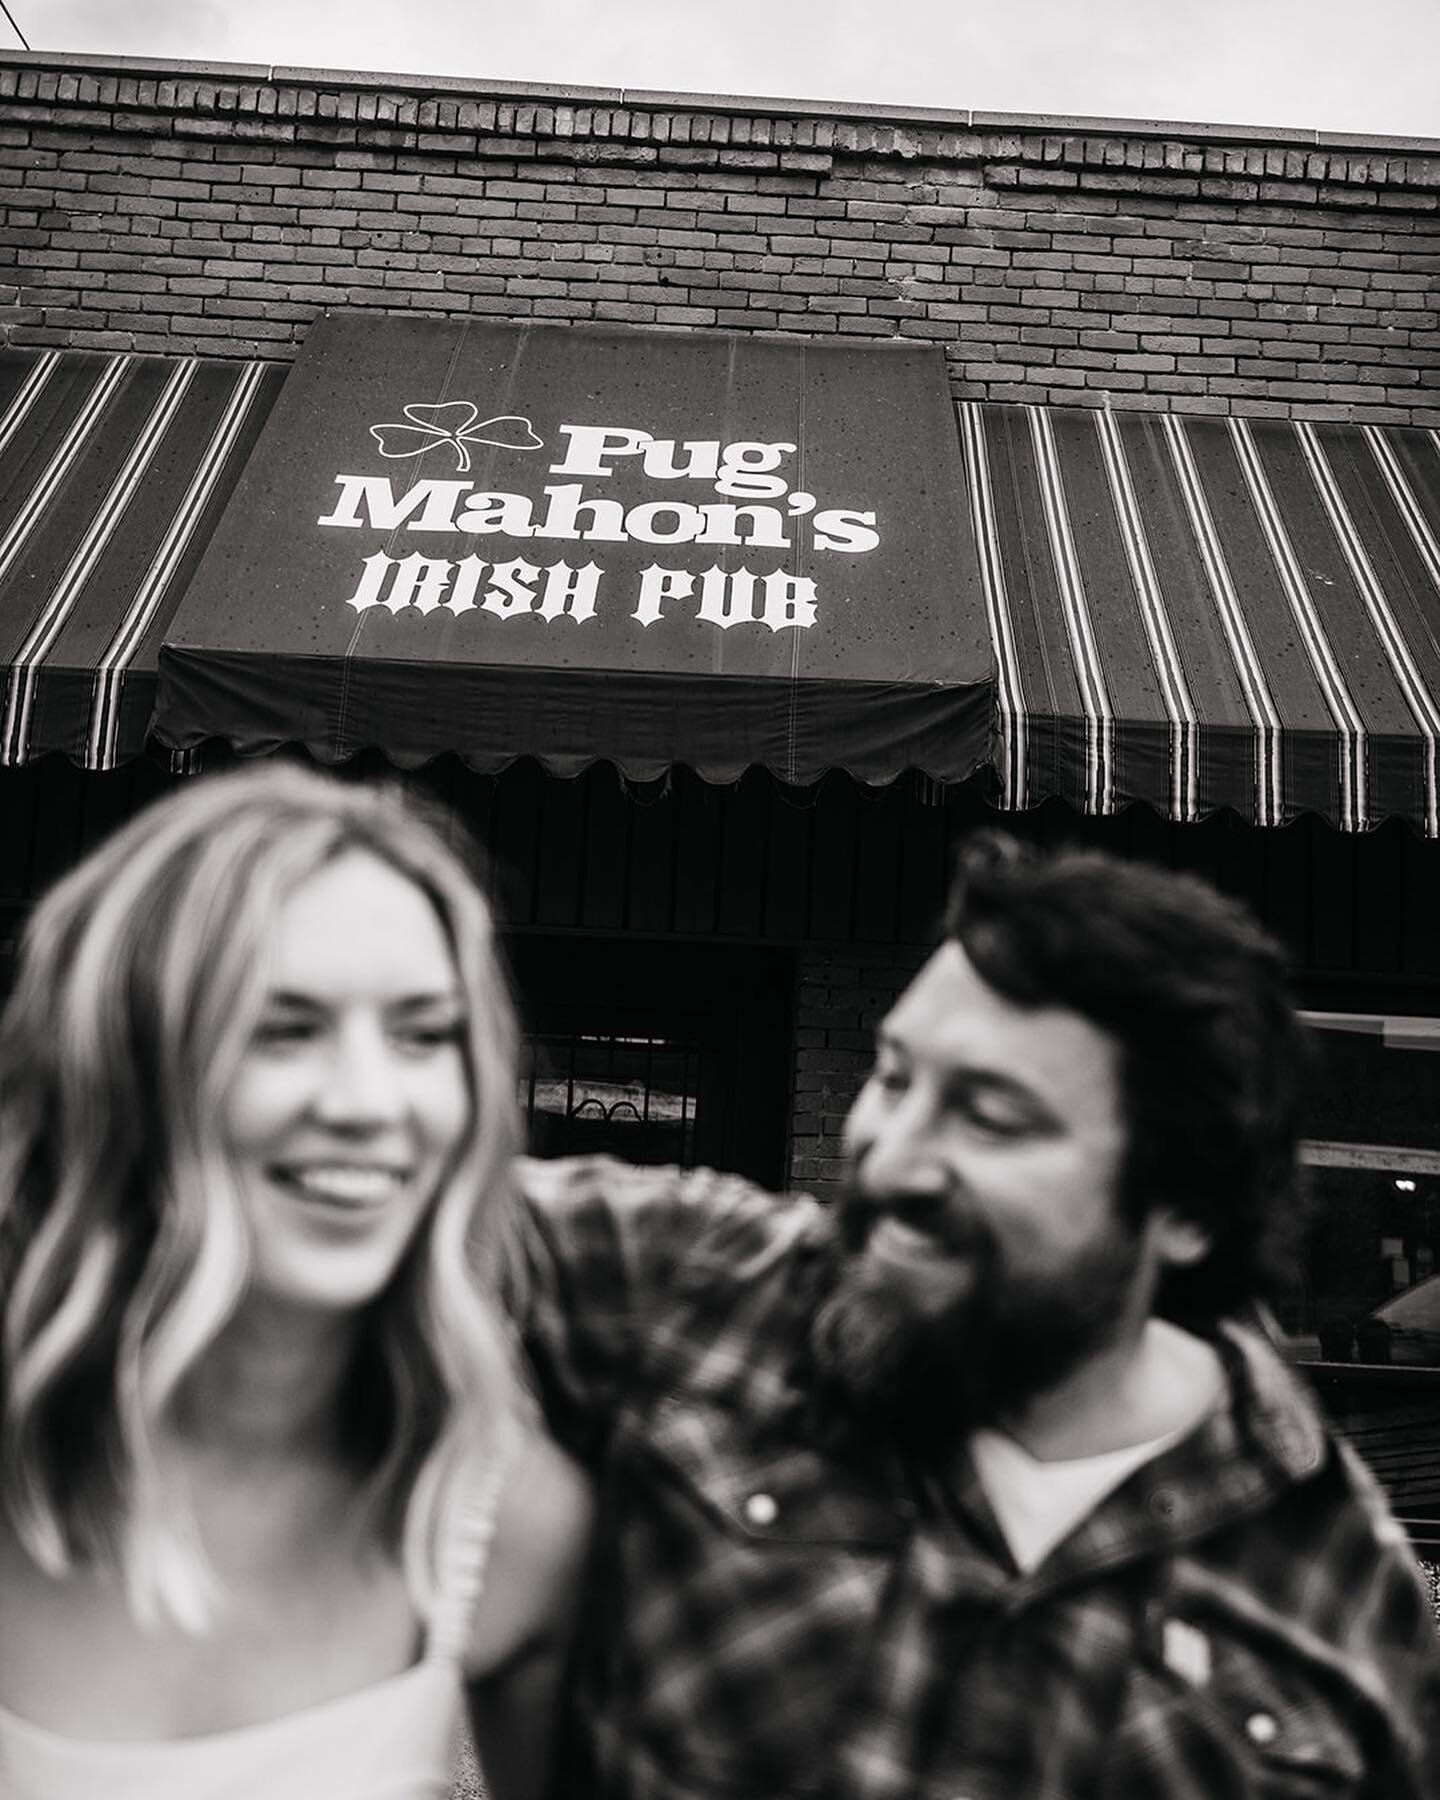 An engagement session can happen ANYWHERE.

Want to recreate your first date, complete with a bootleg box of pizza because the establishment is now closed? Absolutely. 

Wish to waltz into your favorite bar (greeted with the enthusiasm of a Cheers ep